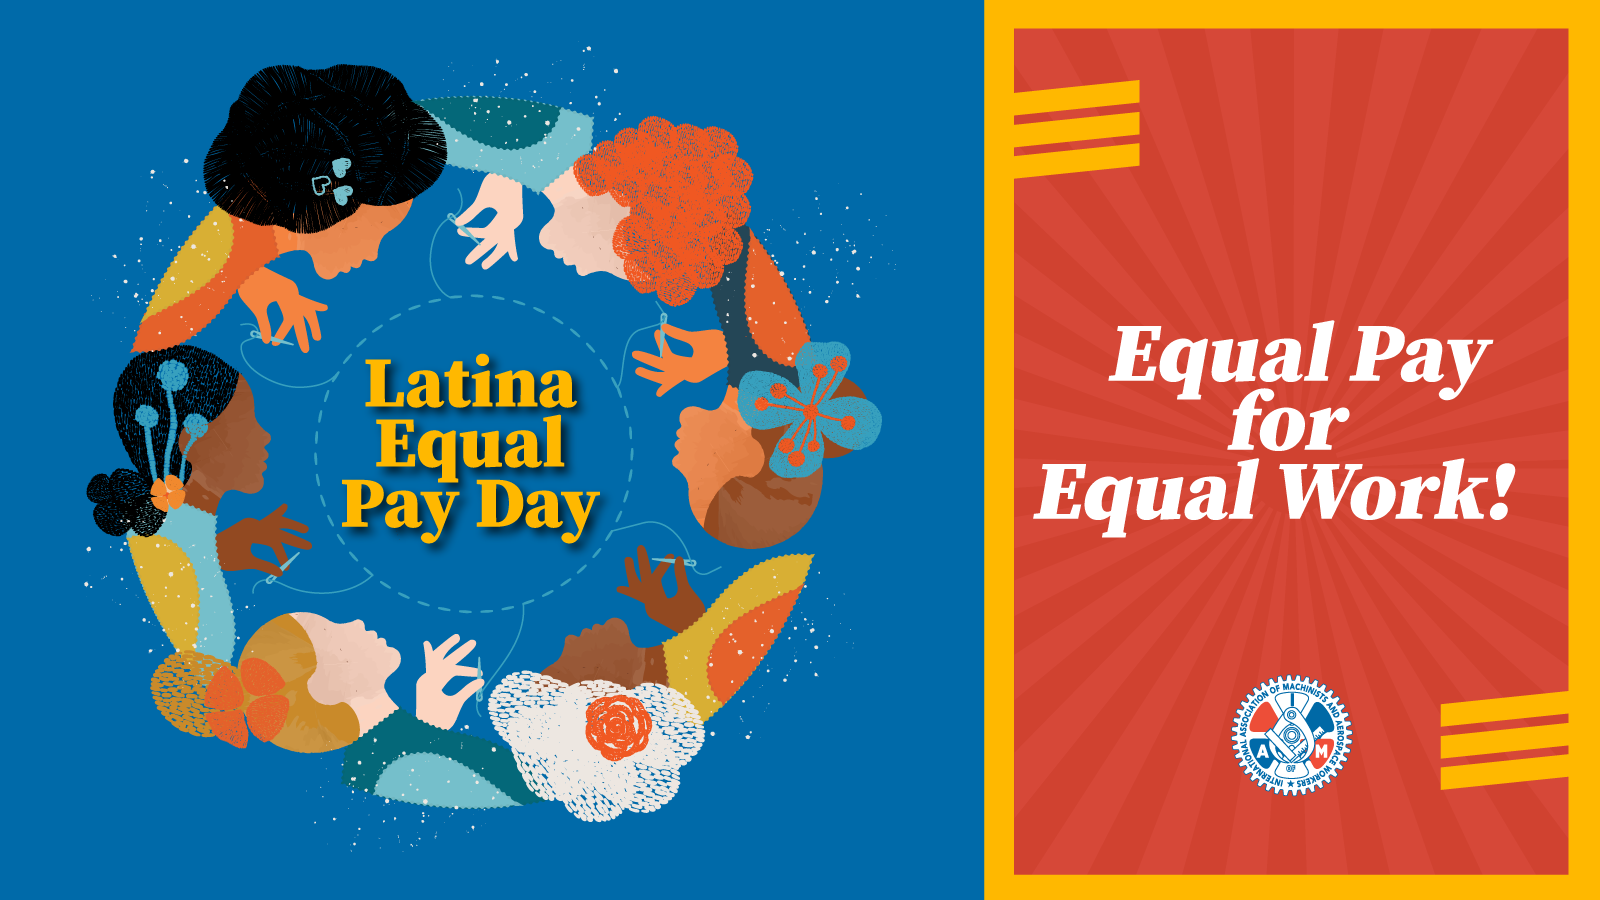 Latina Equal Pay Day 2023 is October 5